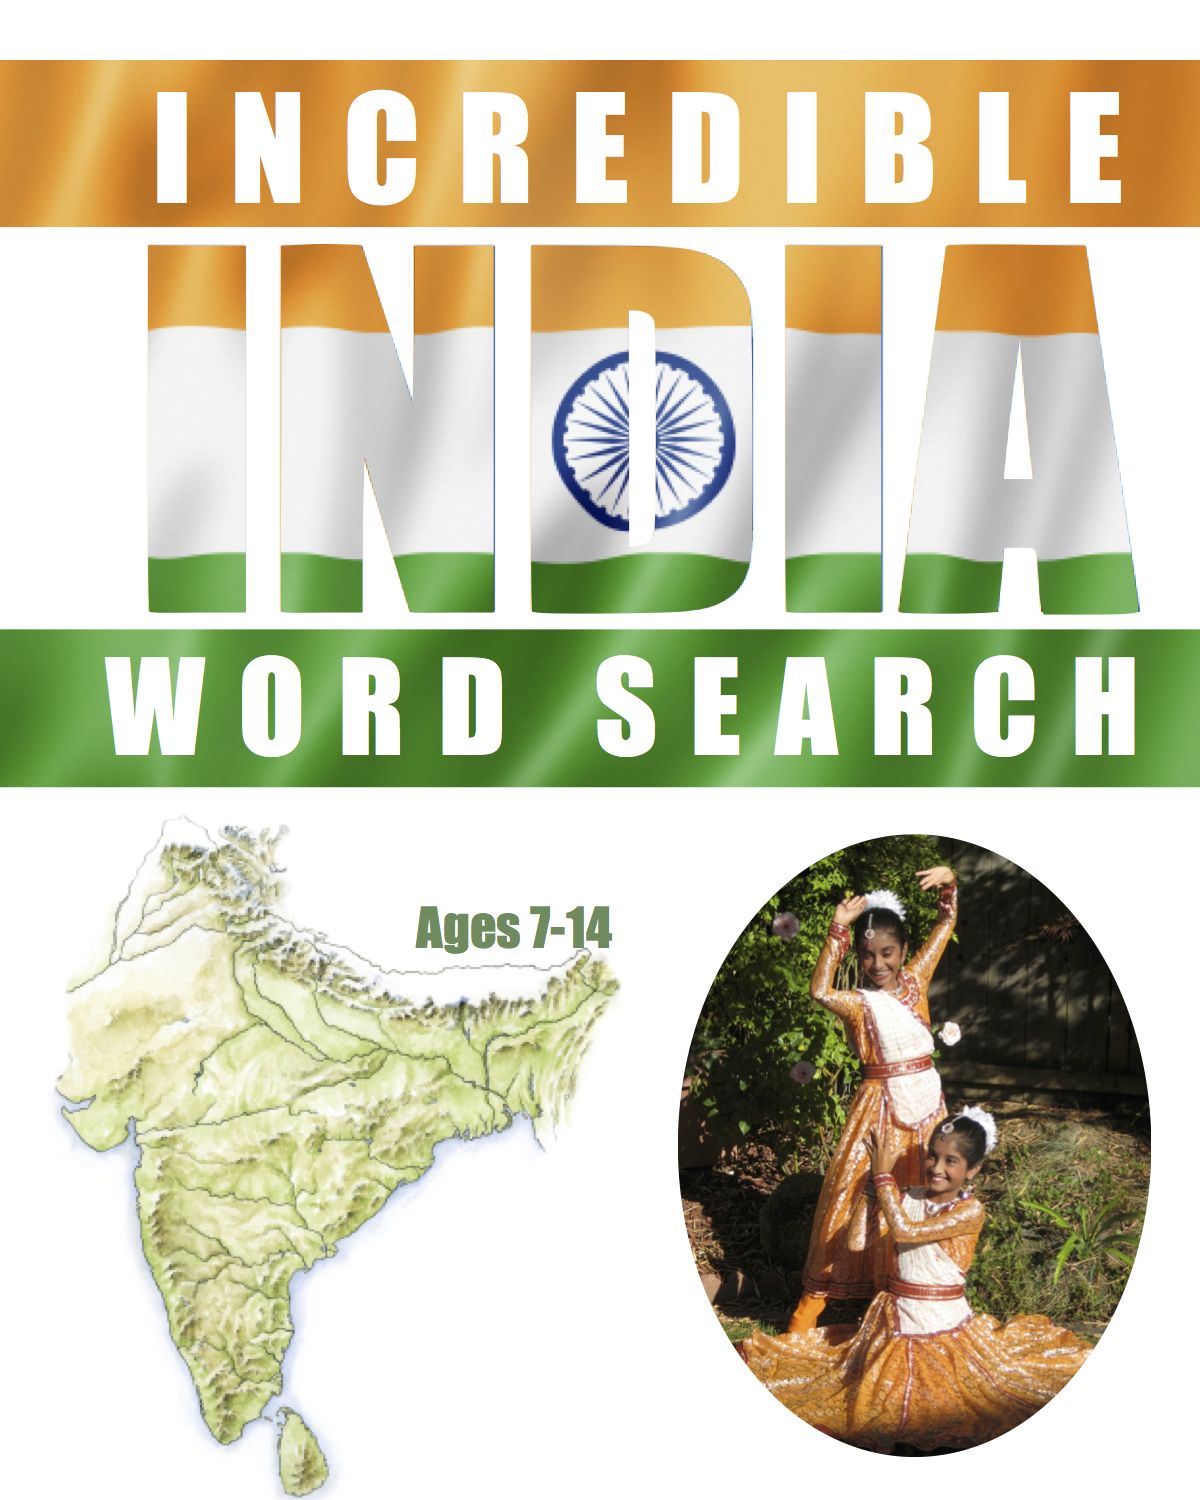 india word search front cover 8 x 10 copy.jpg